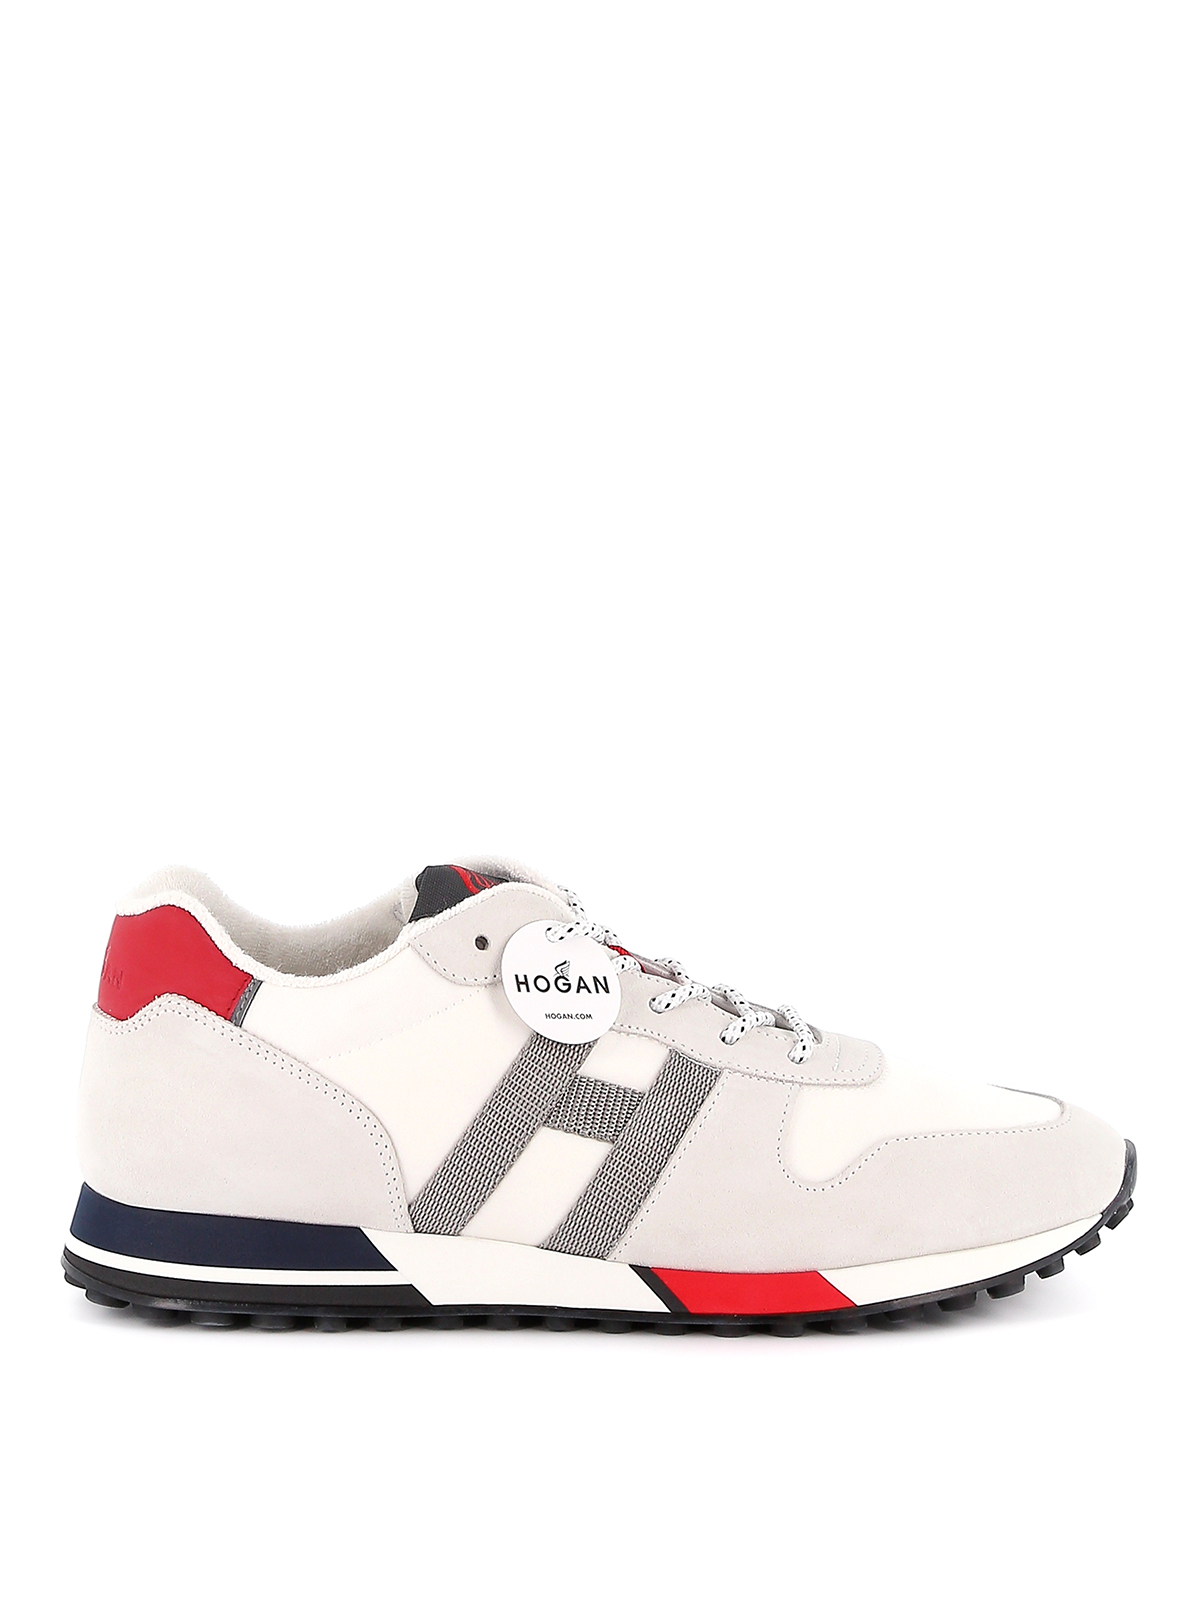 Trainers Hogan - H383 Retro Running sneakers - HXM3830AN51NRV792Y